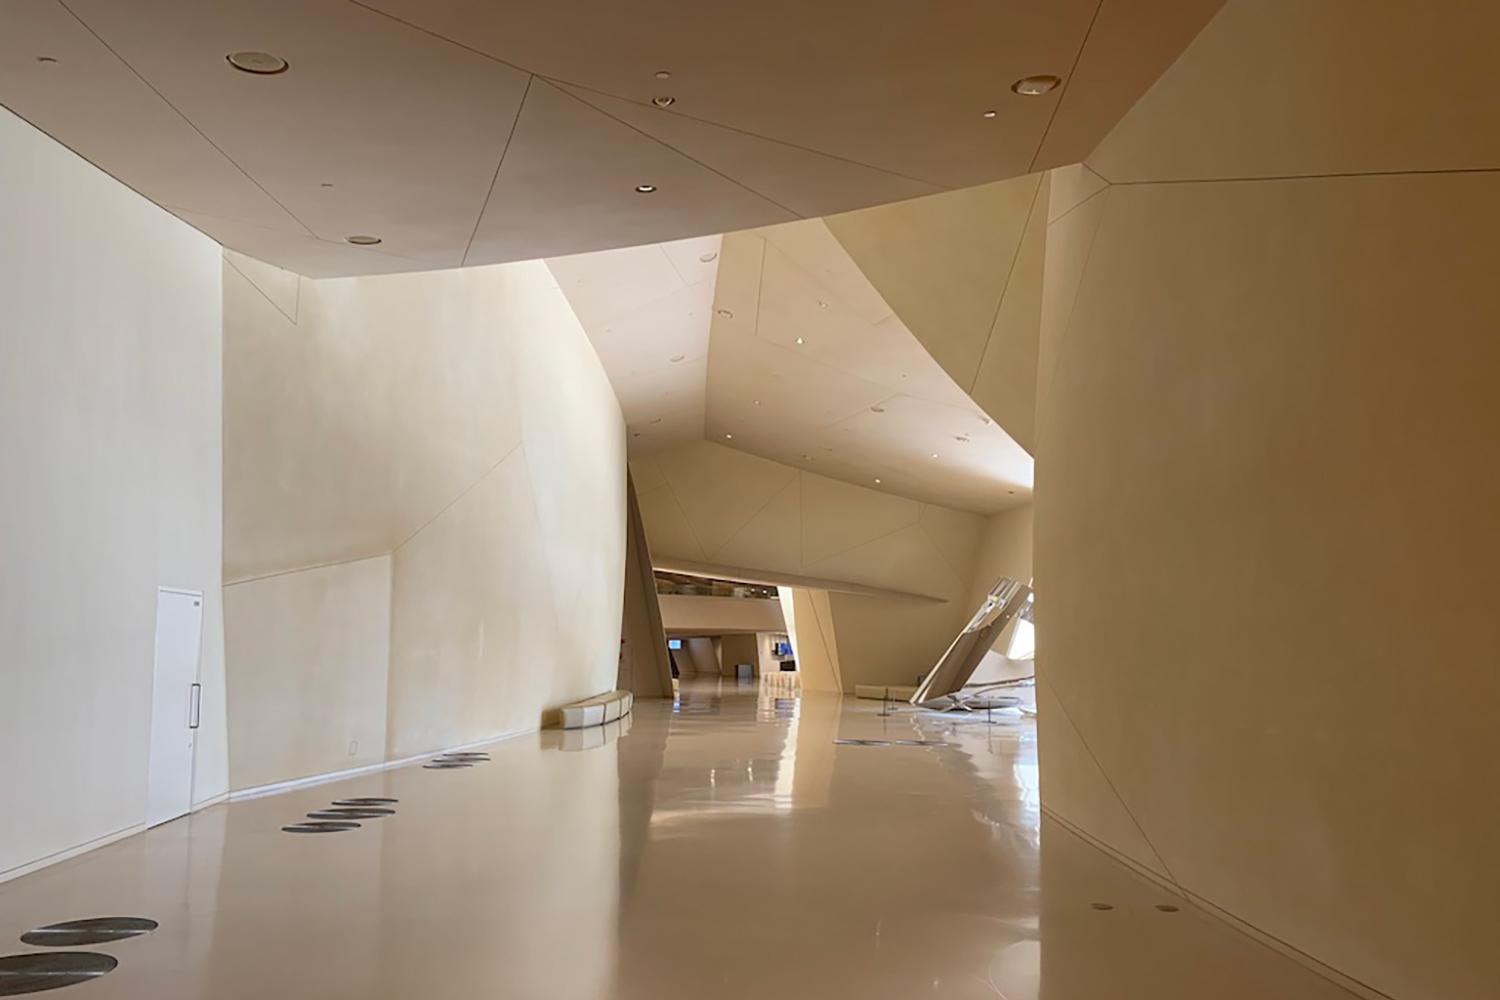 The National Museum of Qatar. WSDG was contracted to create a 3-D acoustic model of the space and make recommendations regarding appropriate speaker usage and placement. Interior.